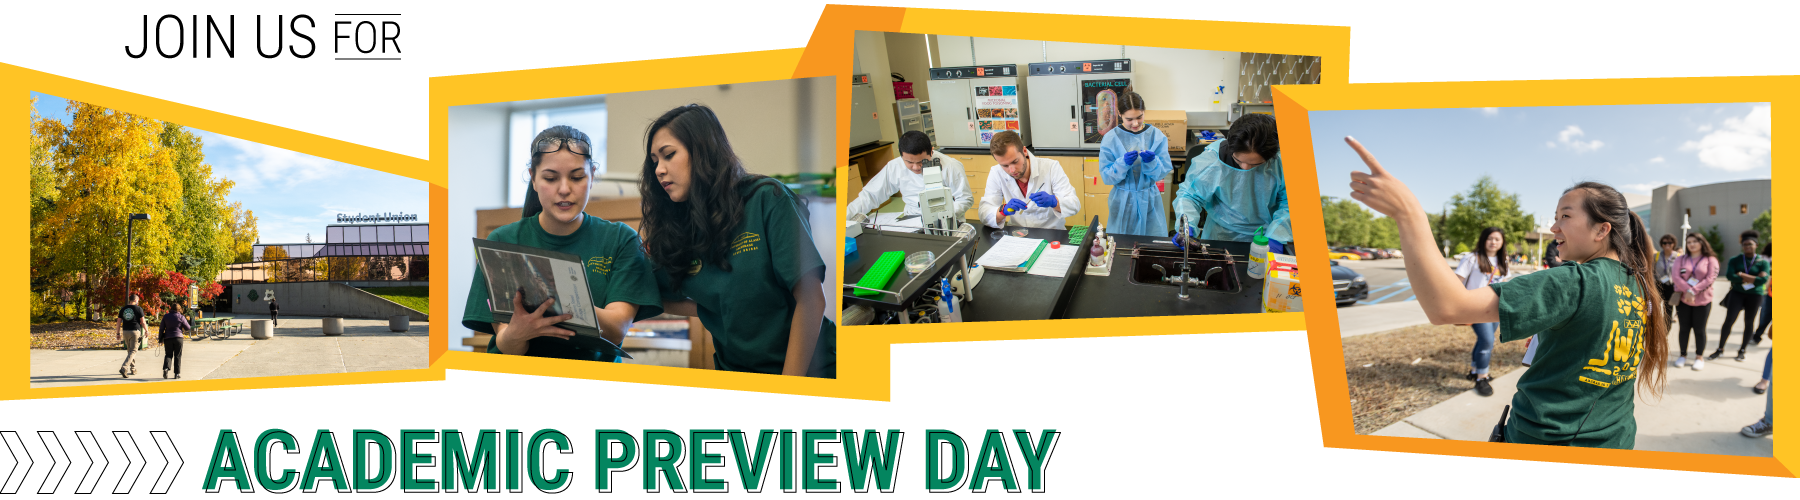 Join Us for Academic Preview Day